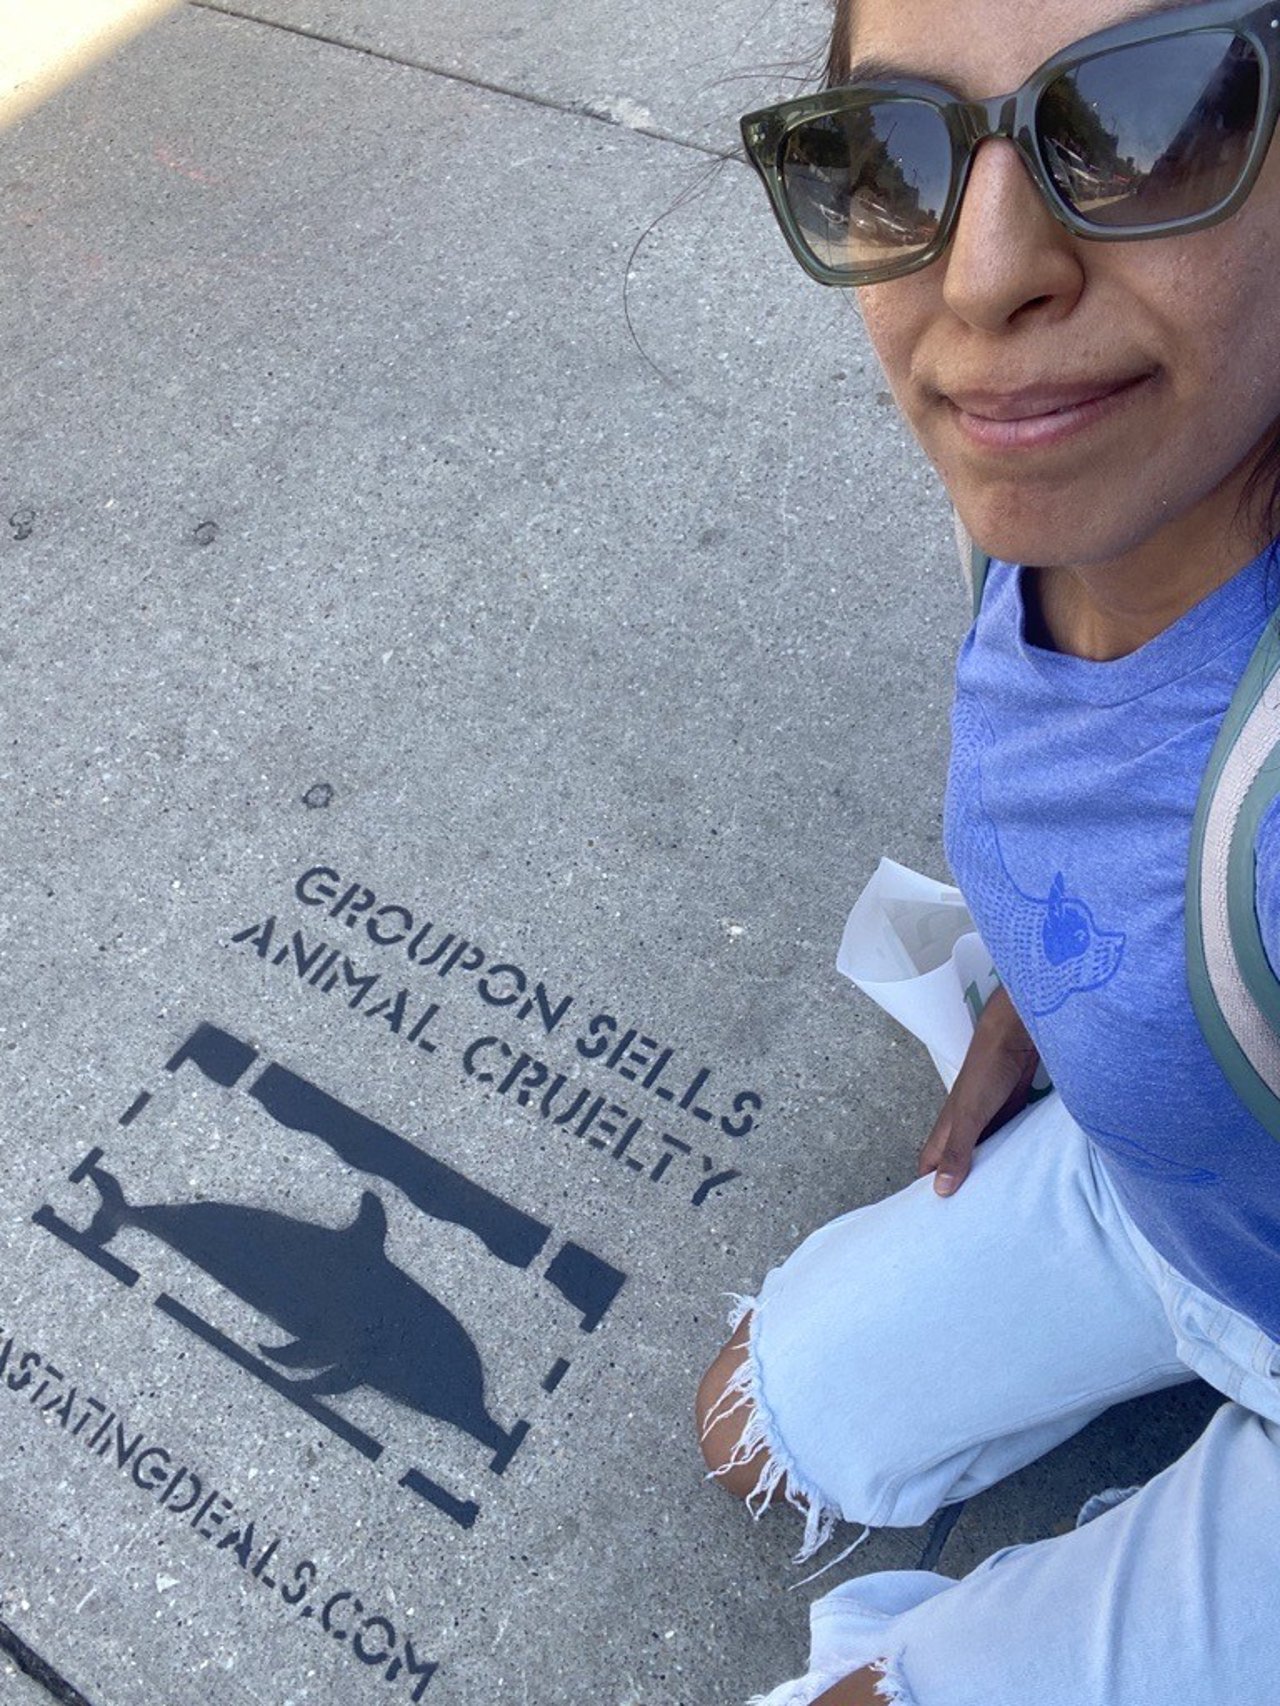 Nicole Barrantes posing with a sidewalk stencil for her Groupon campaign